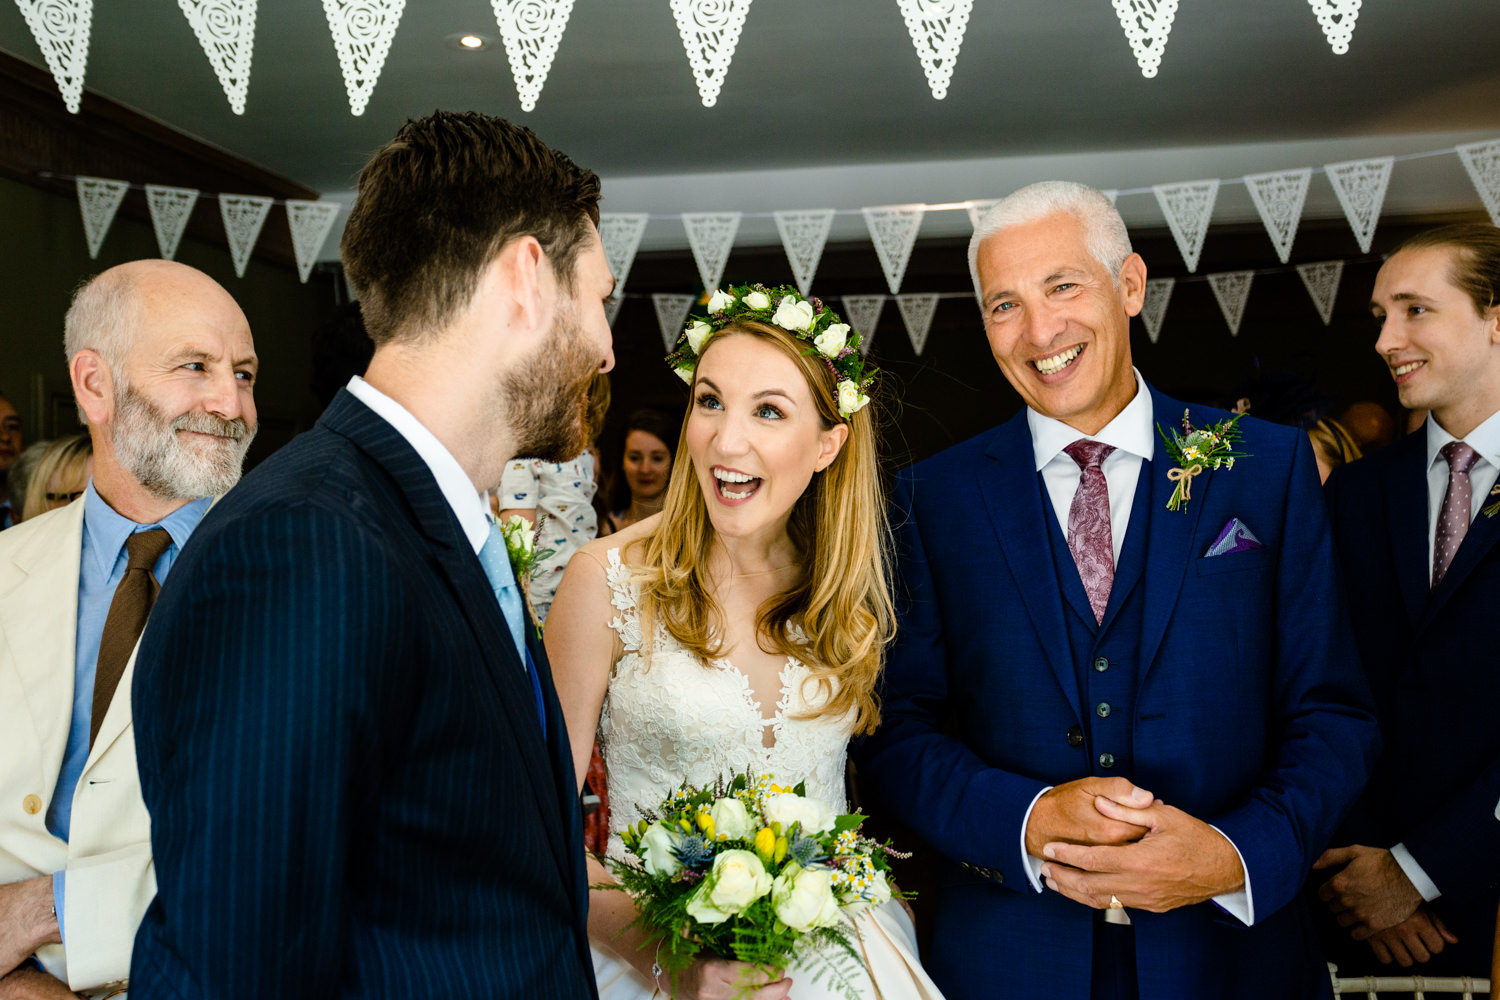 A bride excited to see her groom, wedding photography Whirlowbrook Hall